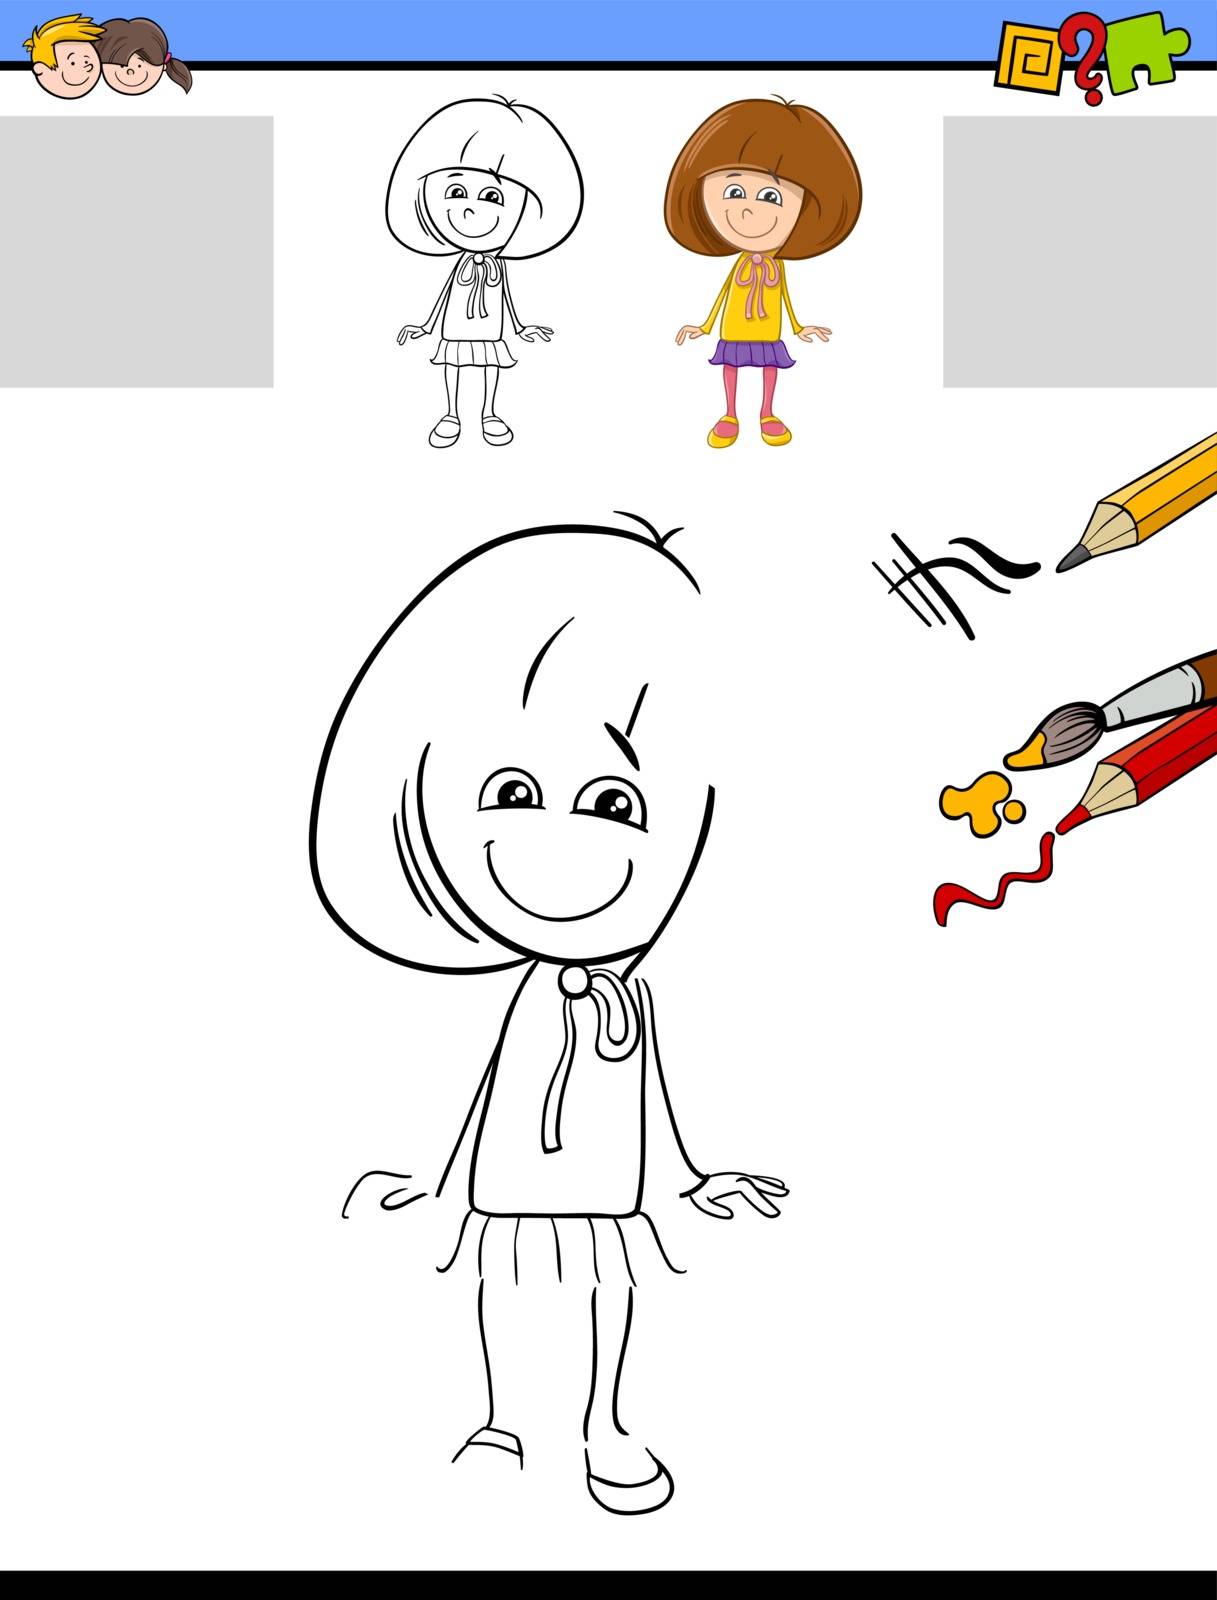 Cartoon Illustration of Drawing and Coloring Educational Activity Task for Preschool Children with Kid Girl Character